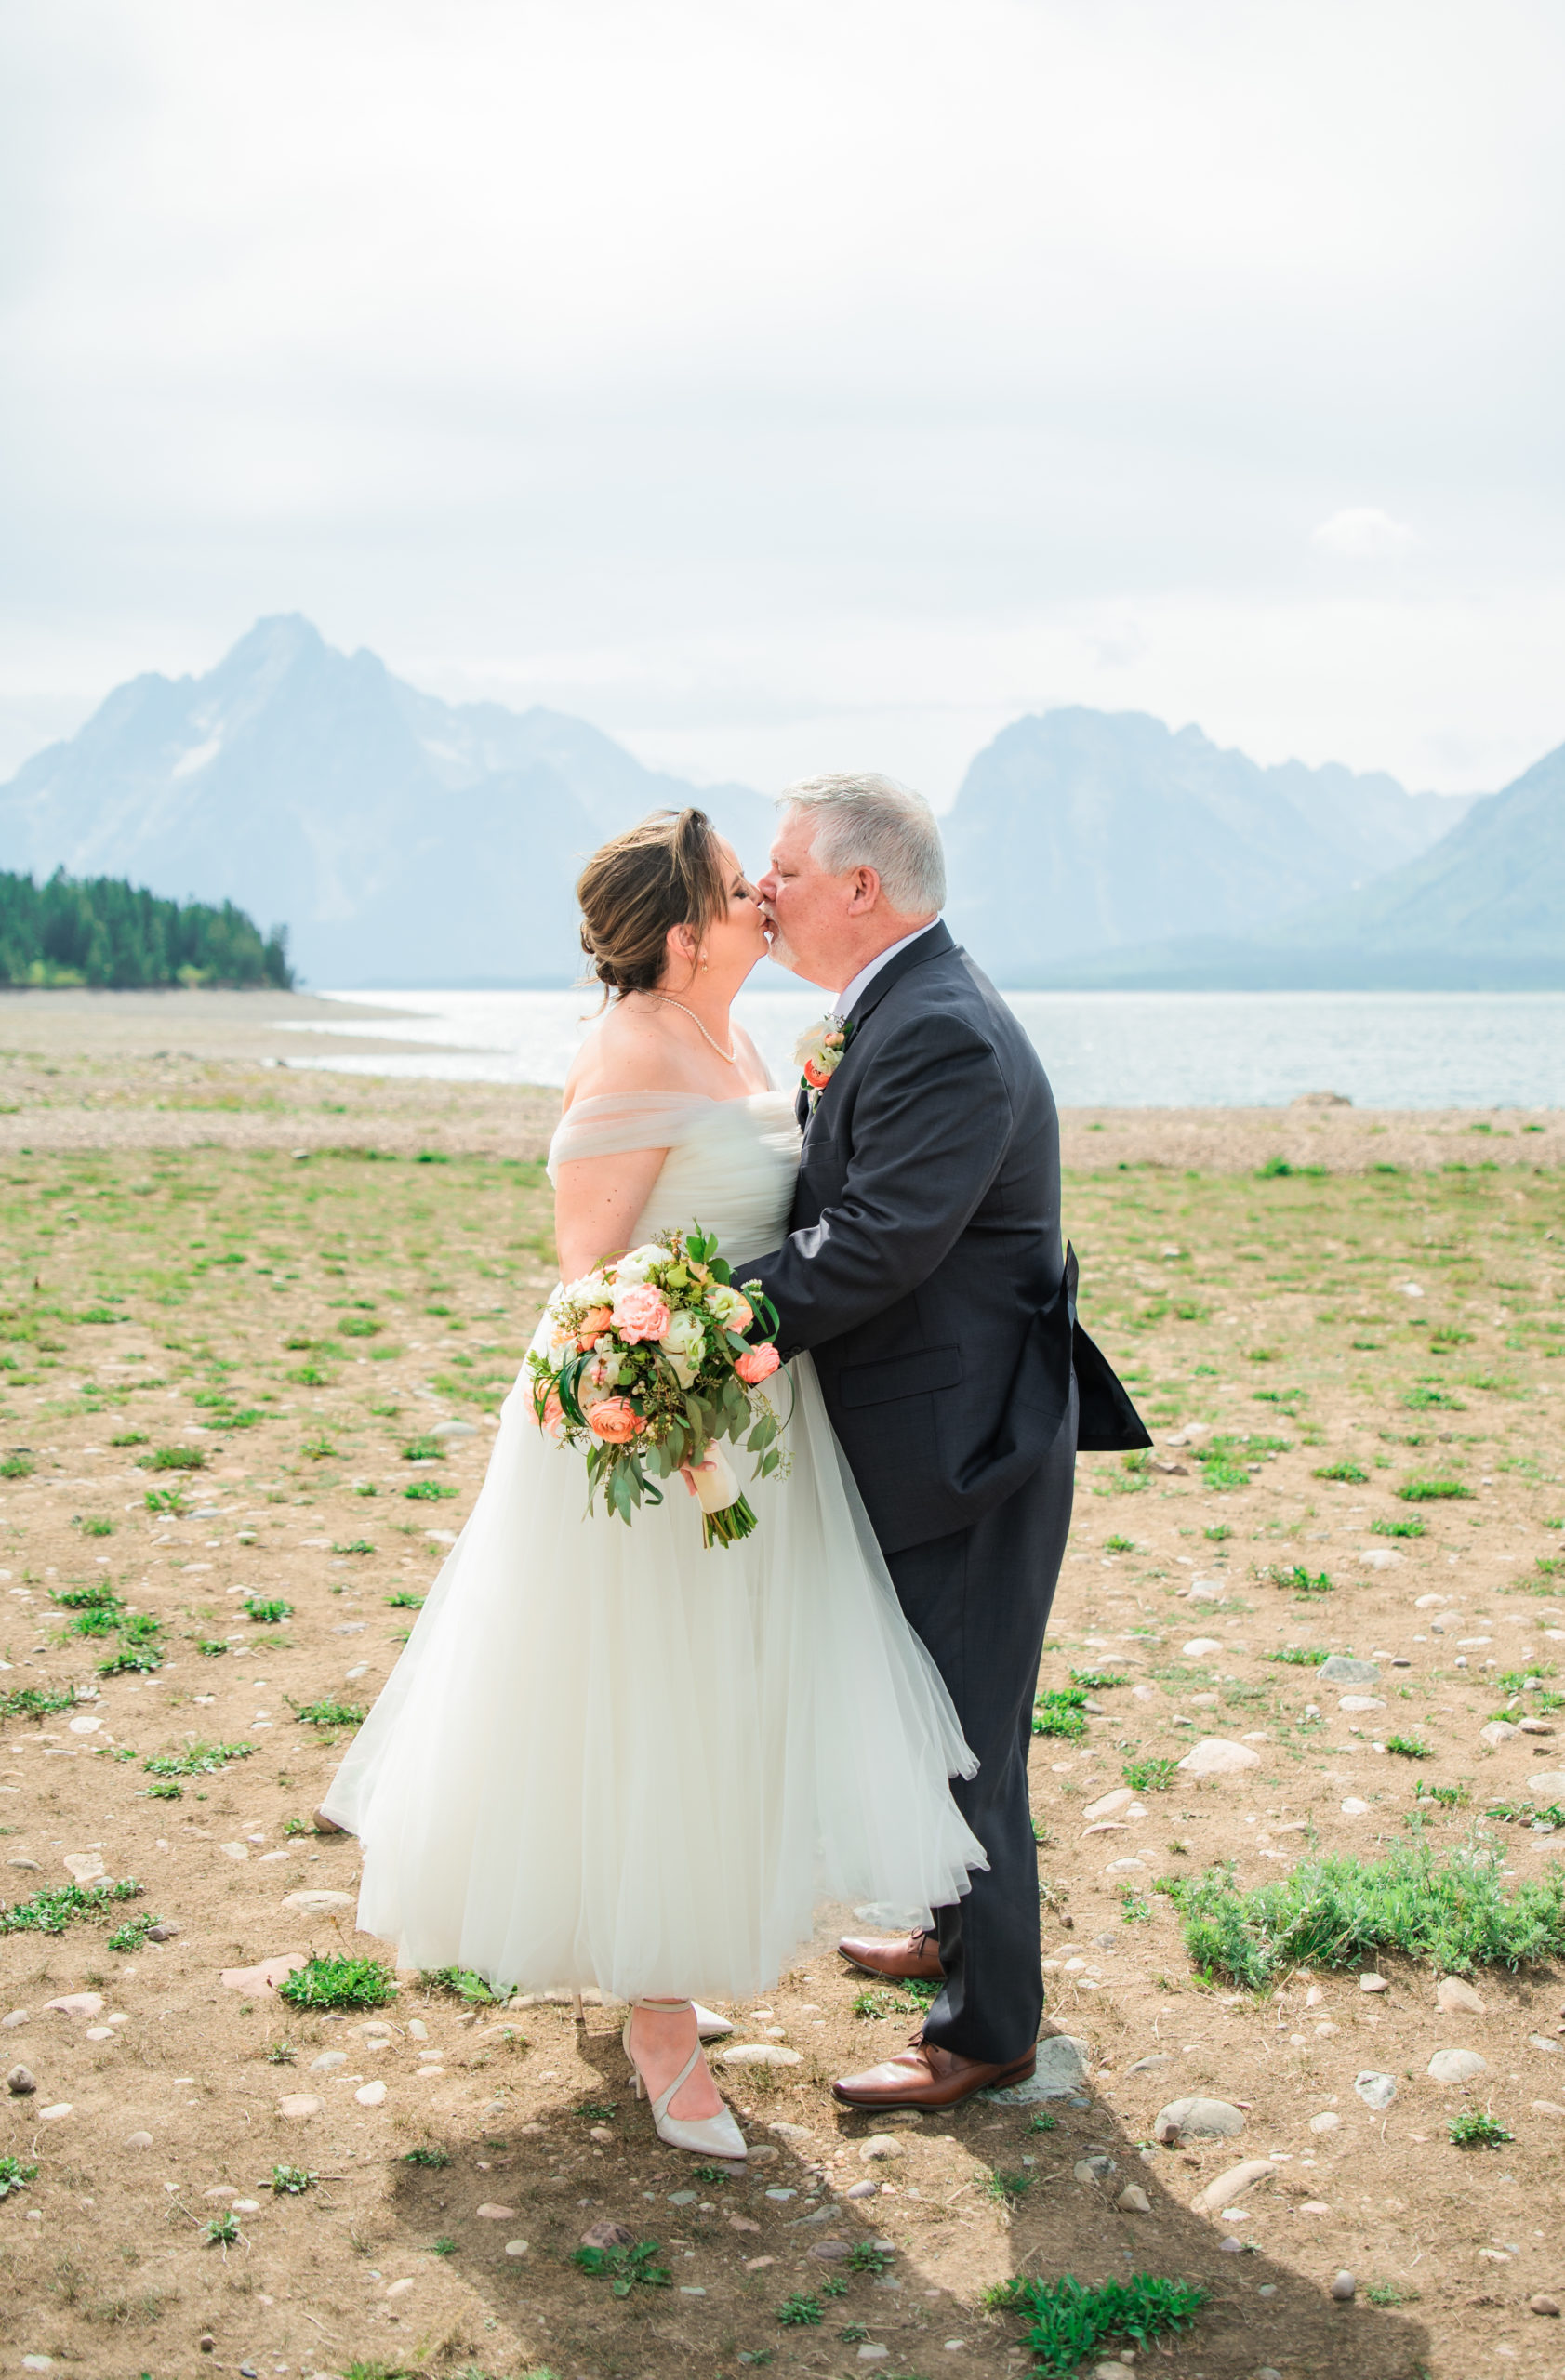 Jackson Hole elopement photographer captures bride and groom kissing after wedding ceremony